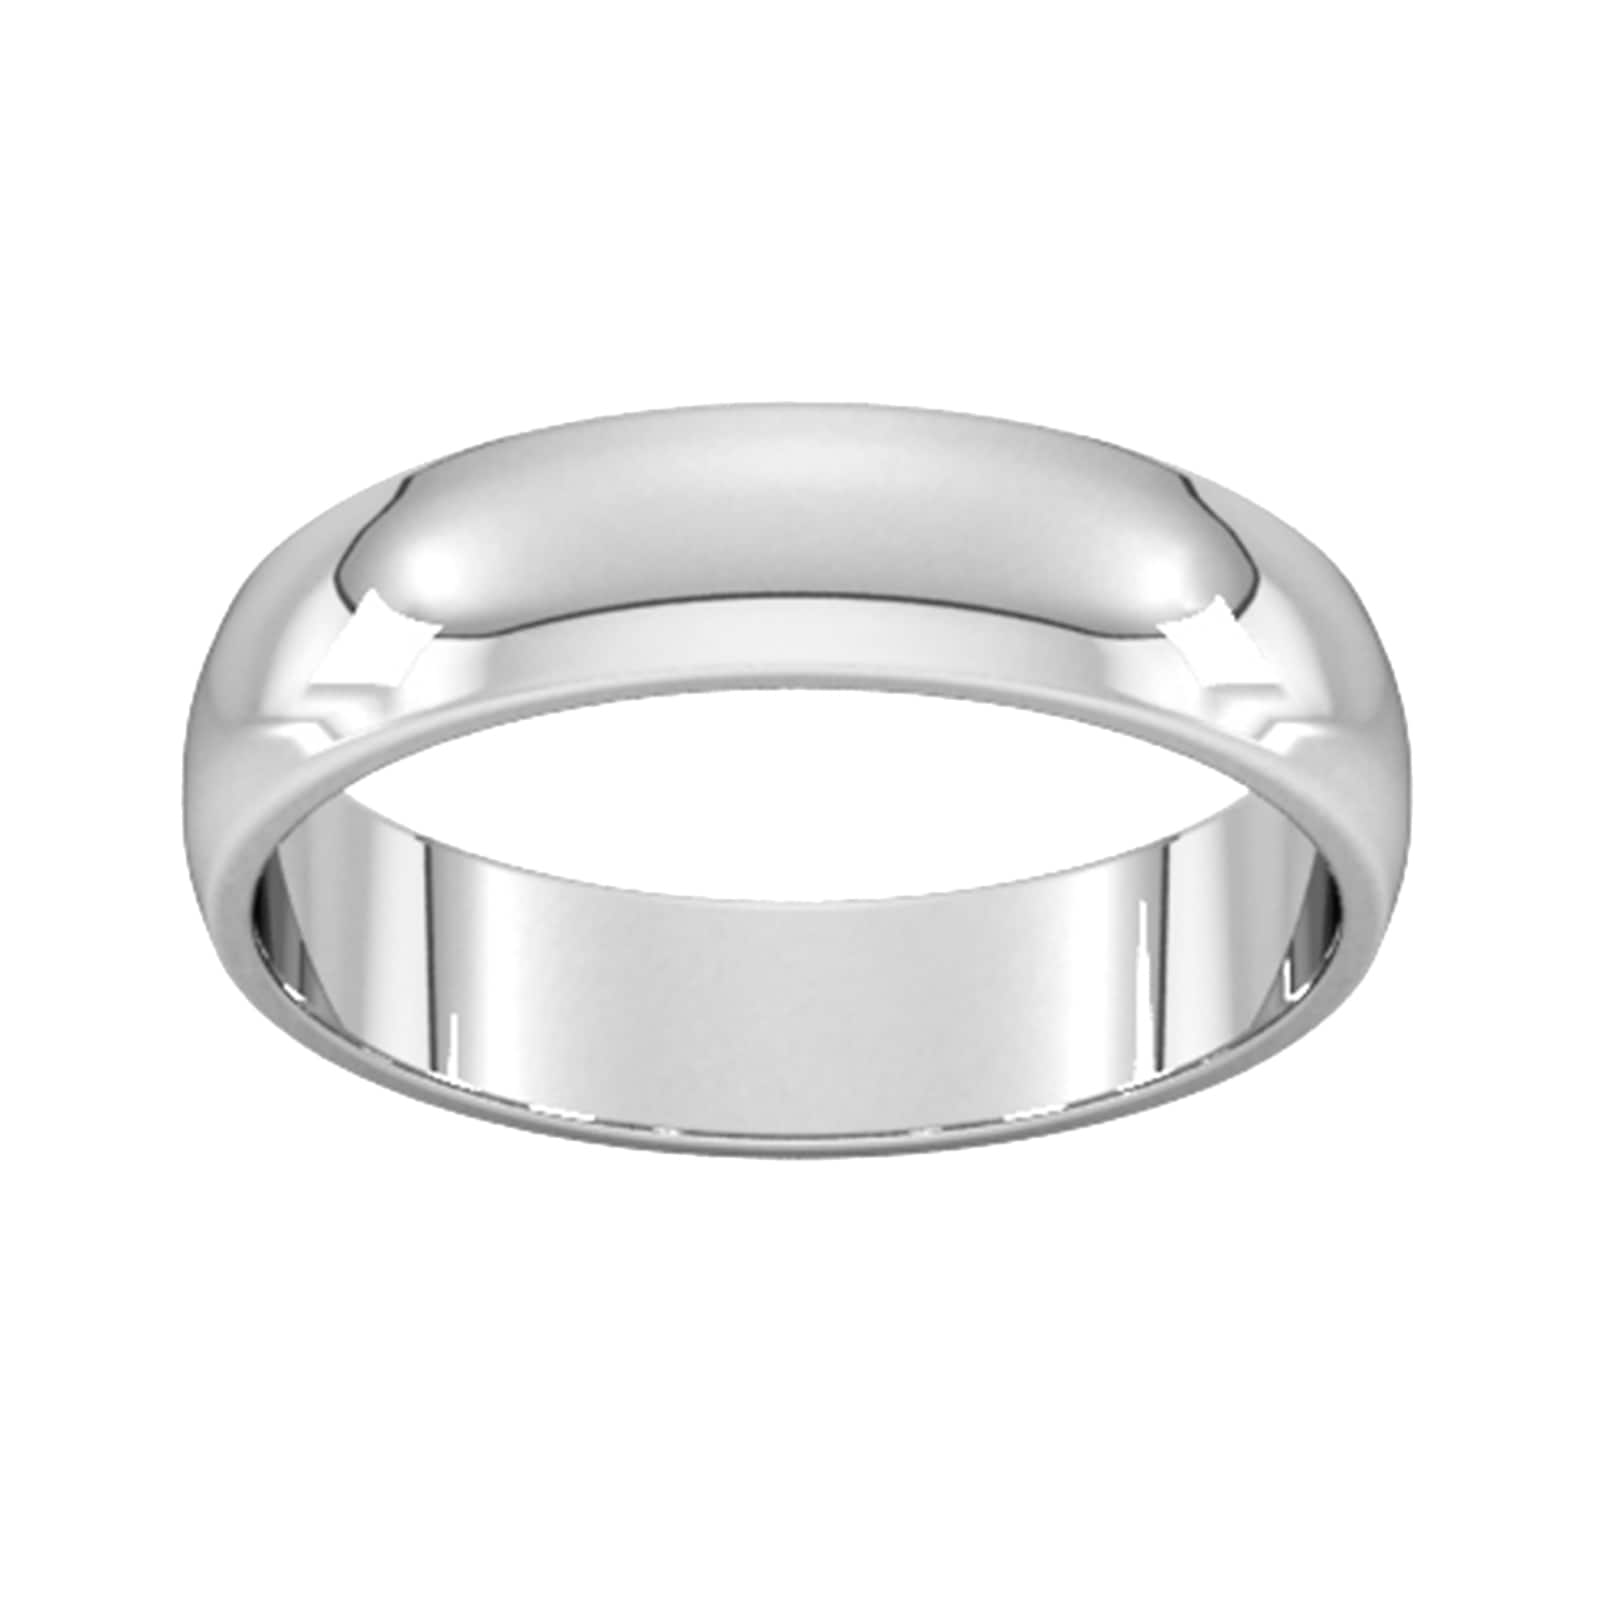 5mm D Shape Standard Wedding Ring In Sterling Silver - Ring Size O